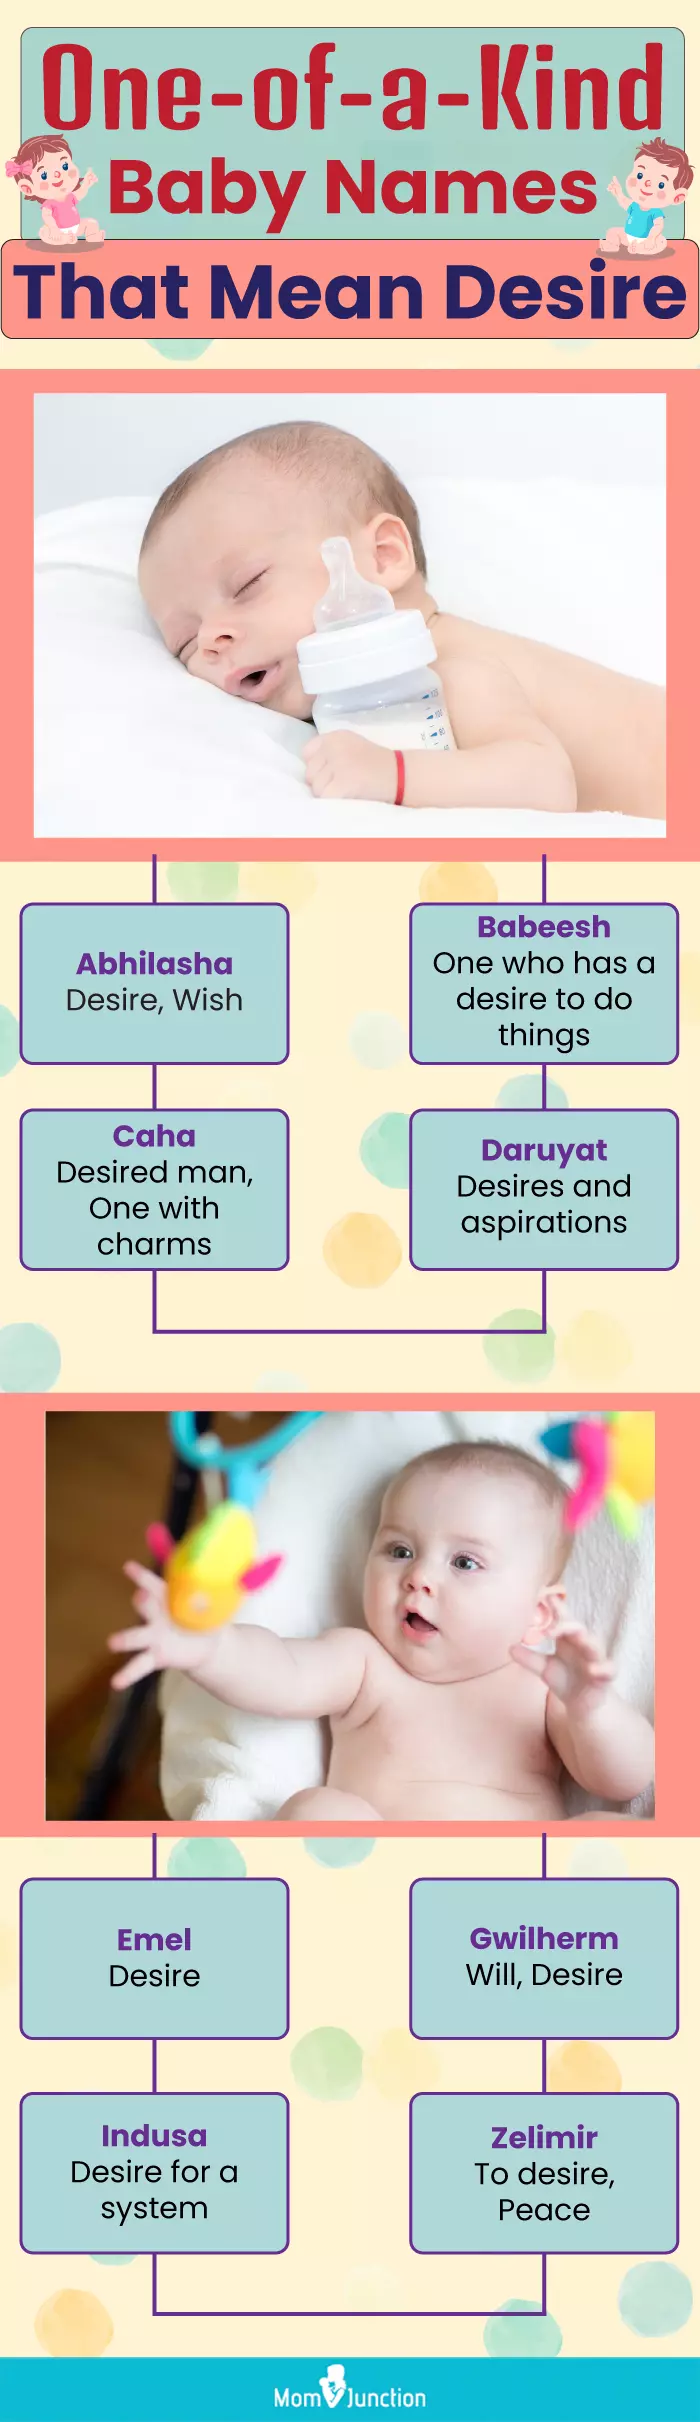 one of a kind baby names that mean desire (infographic)